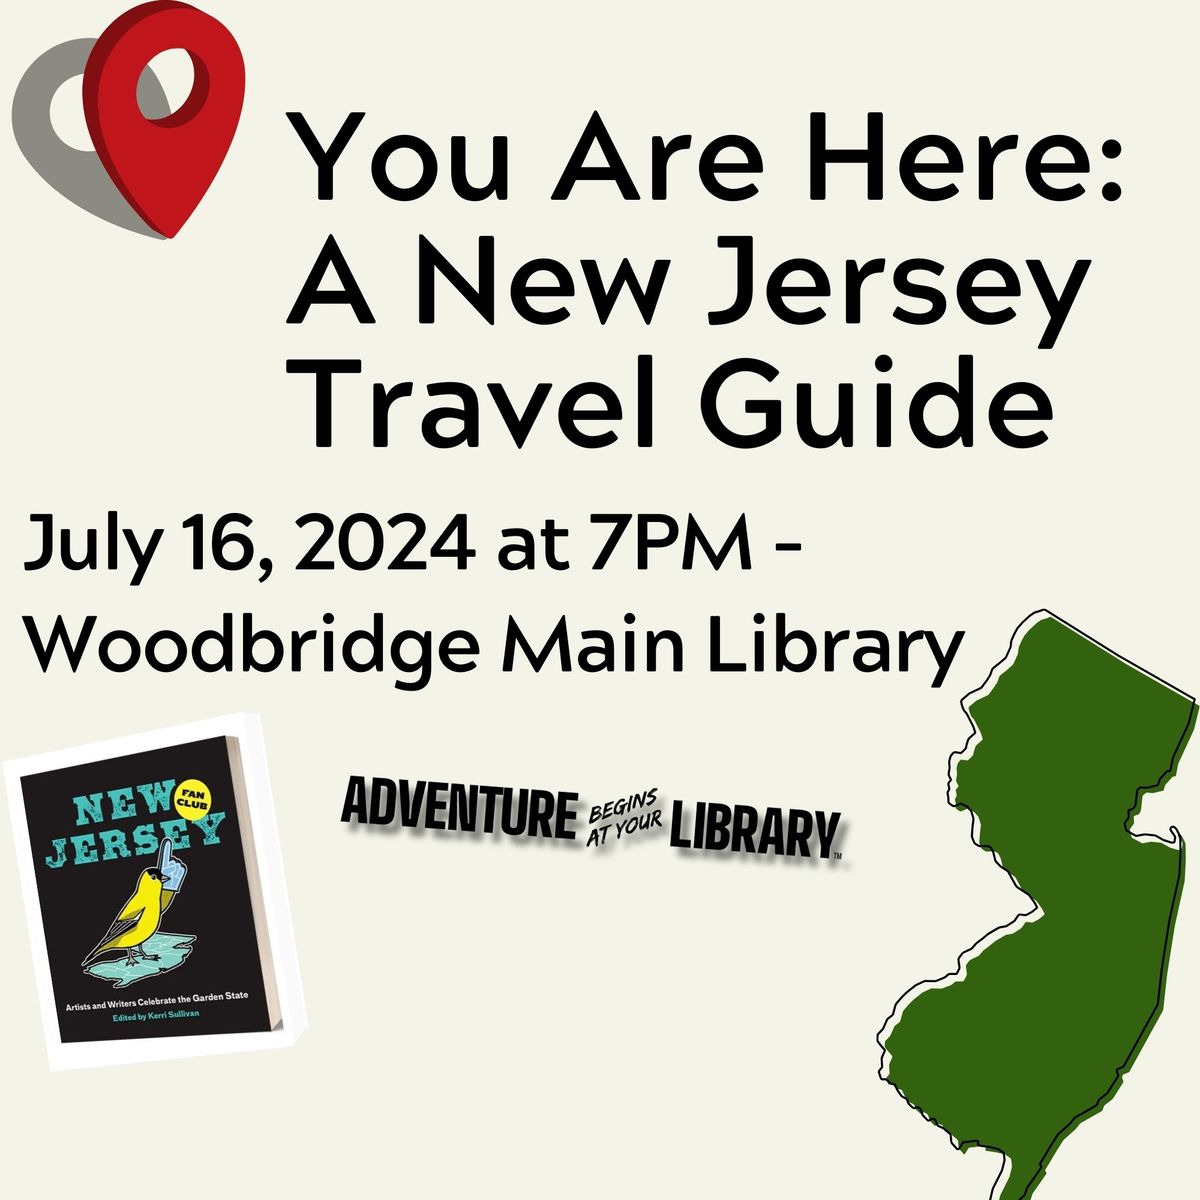 You Are Here: A New Jersey Travel Guide